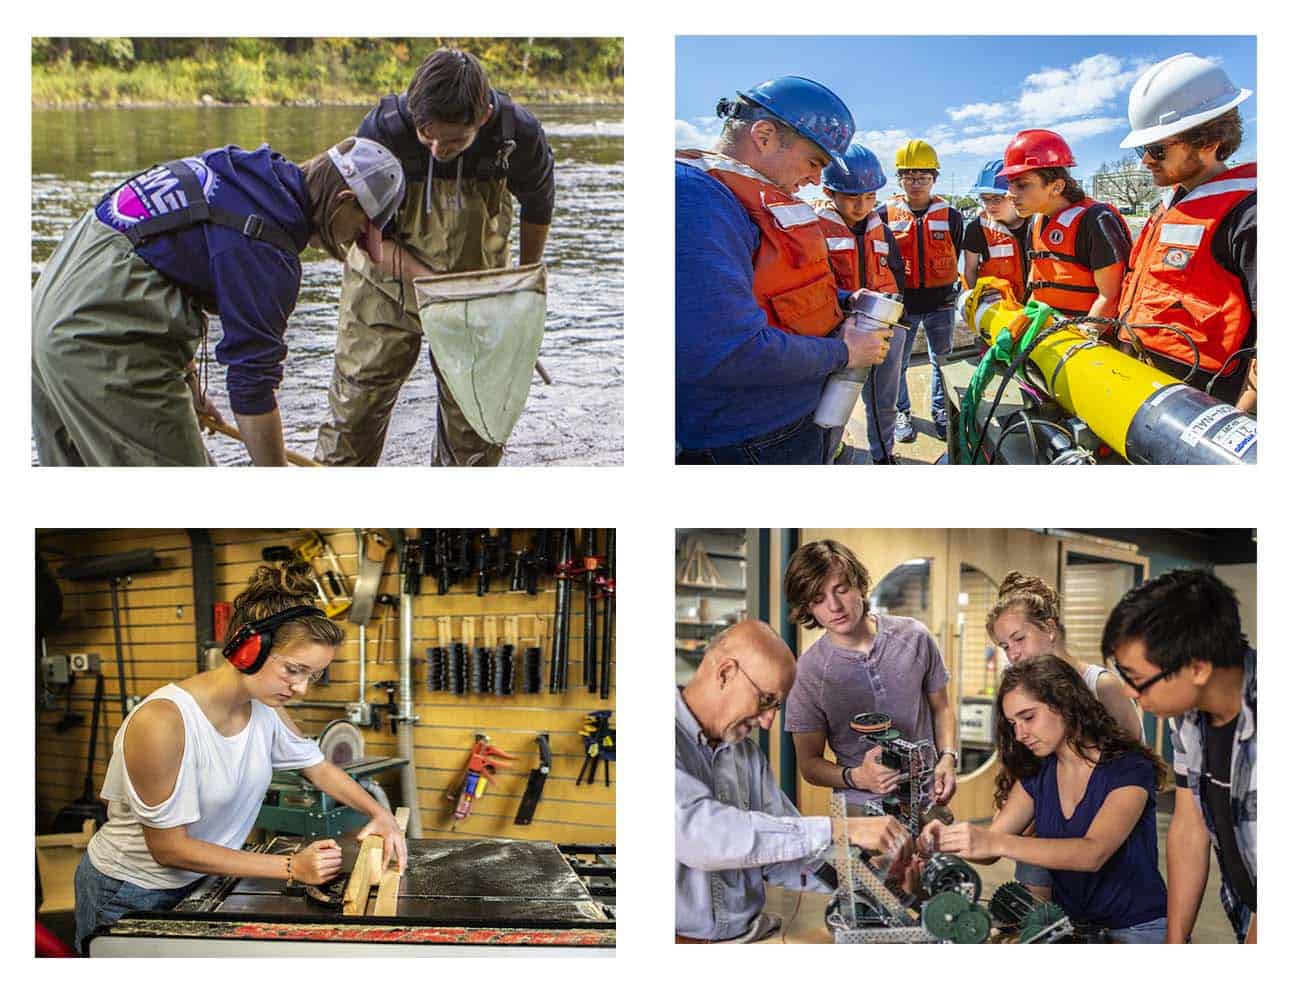 Gould Academy features great nonprofit website photography by featuring students in experiential learning environments